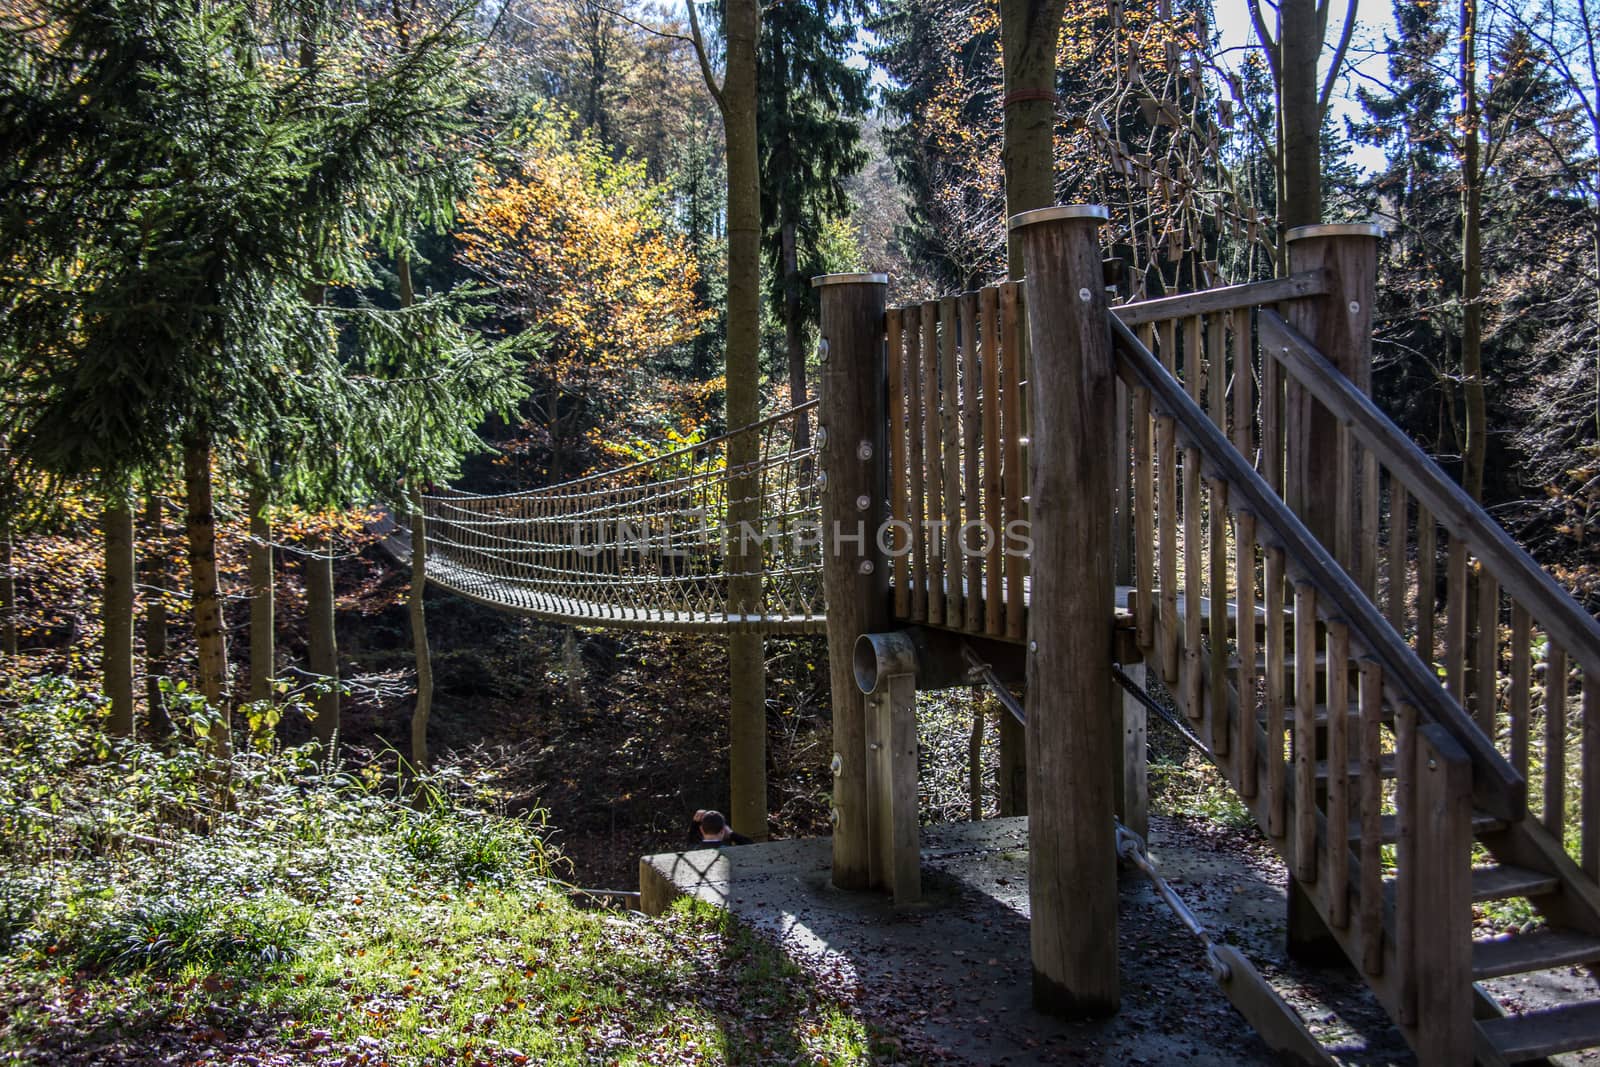 Suspension bridge as a tourist attraction in the Rothaar Mountains